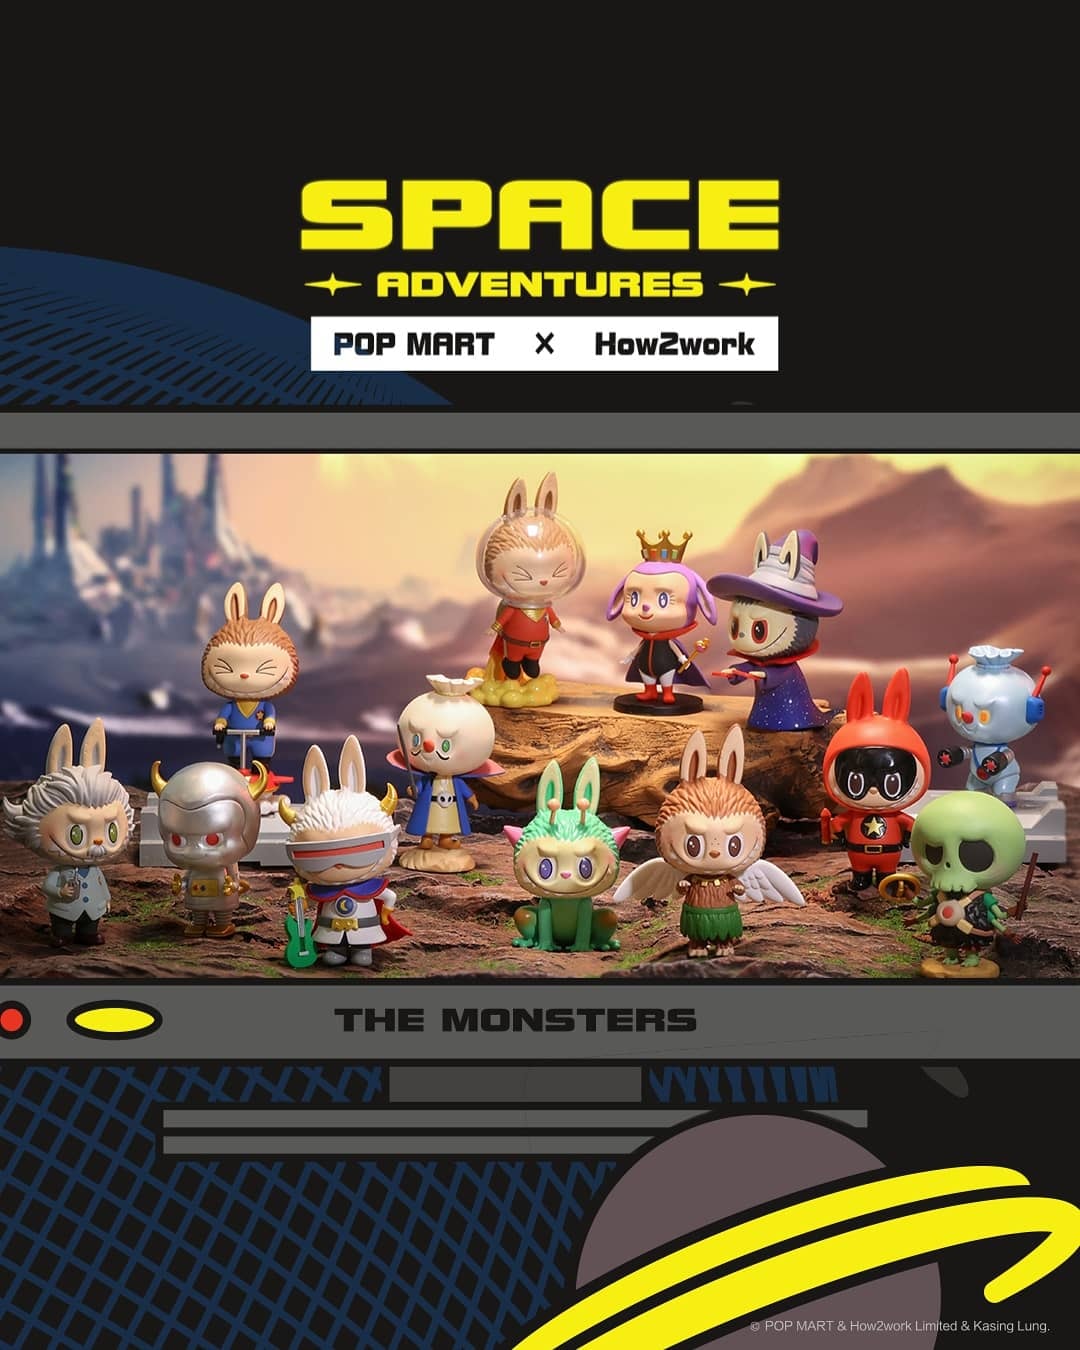 A group of cartoon characters and toy figurines from The Monsters: Space Adventures Blind Box Series by Kasing Lung.